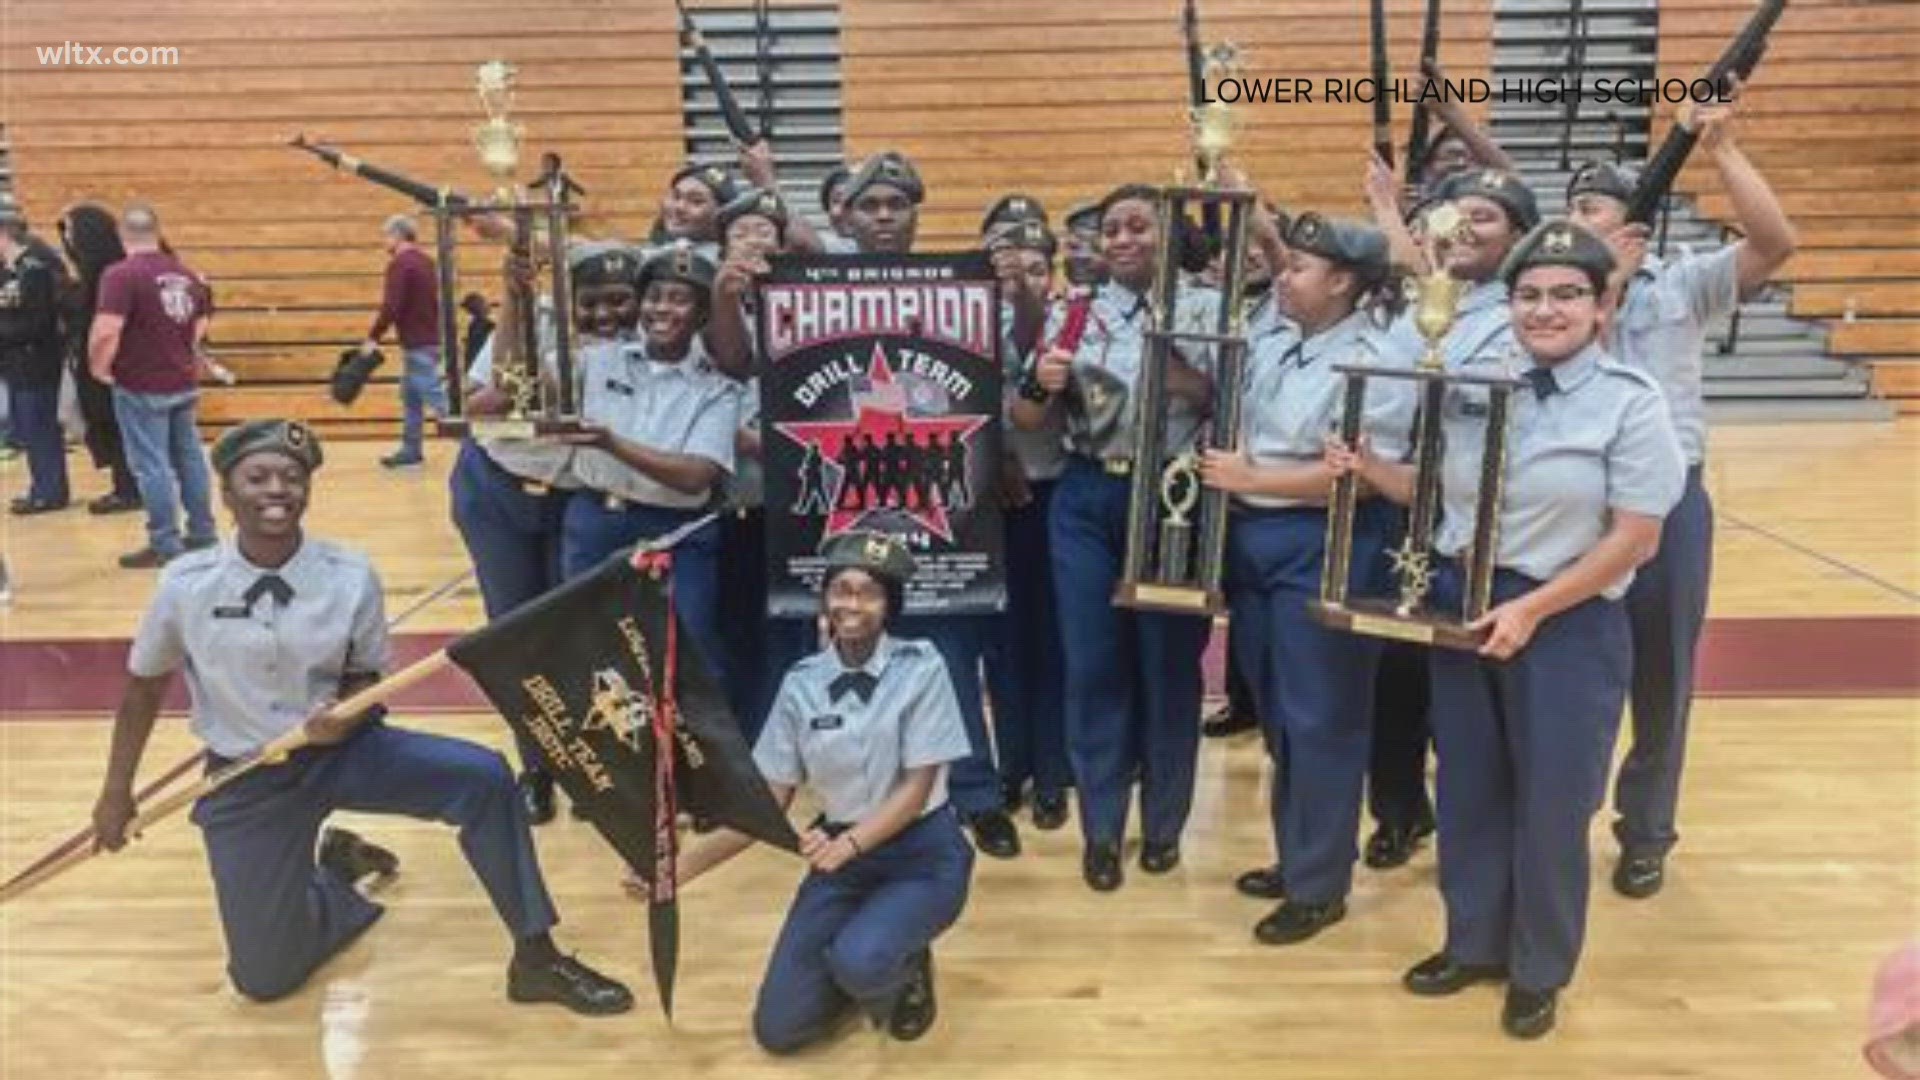 The team from Lower Richland won first place overall in the 4th Brigade Regional Armed drill competition.